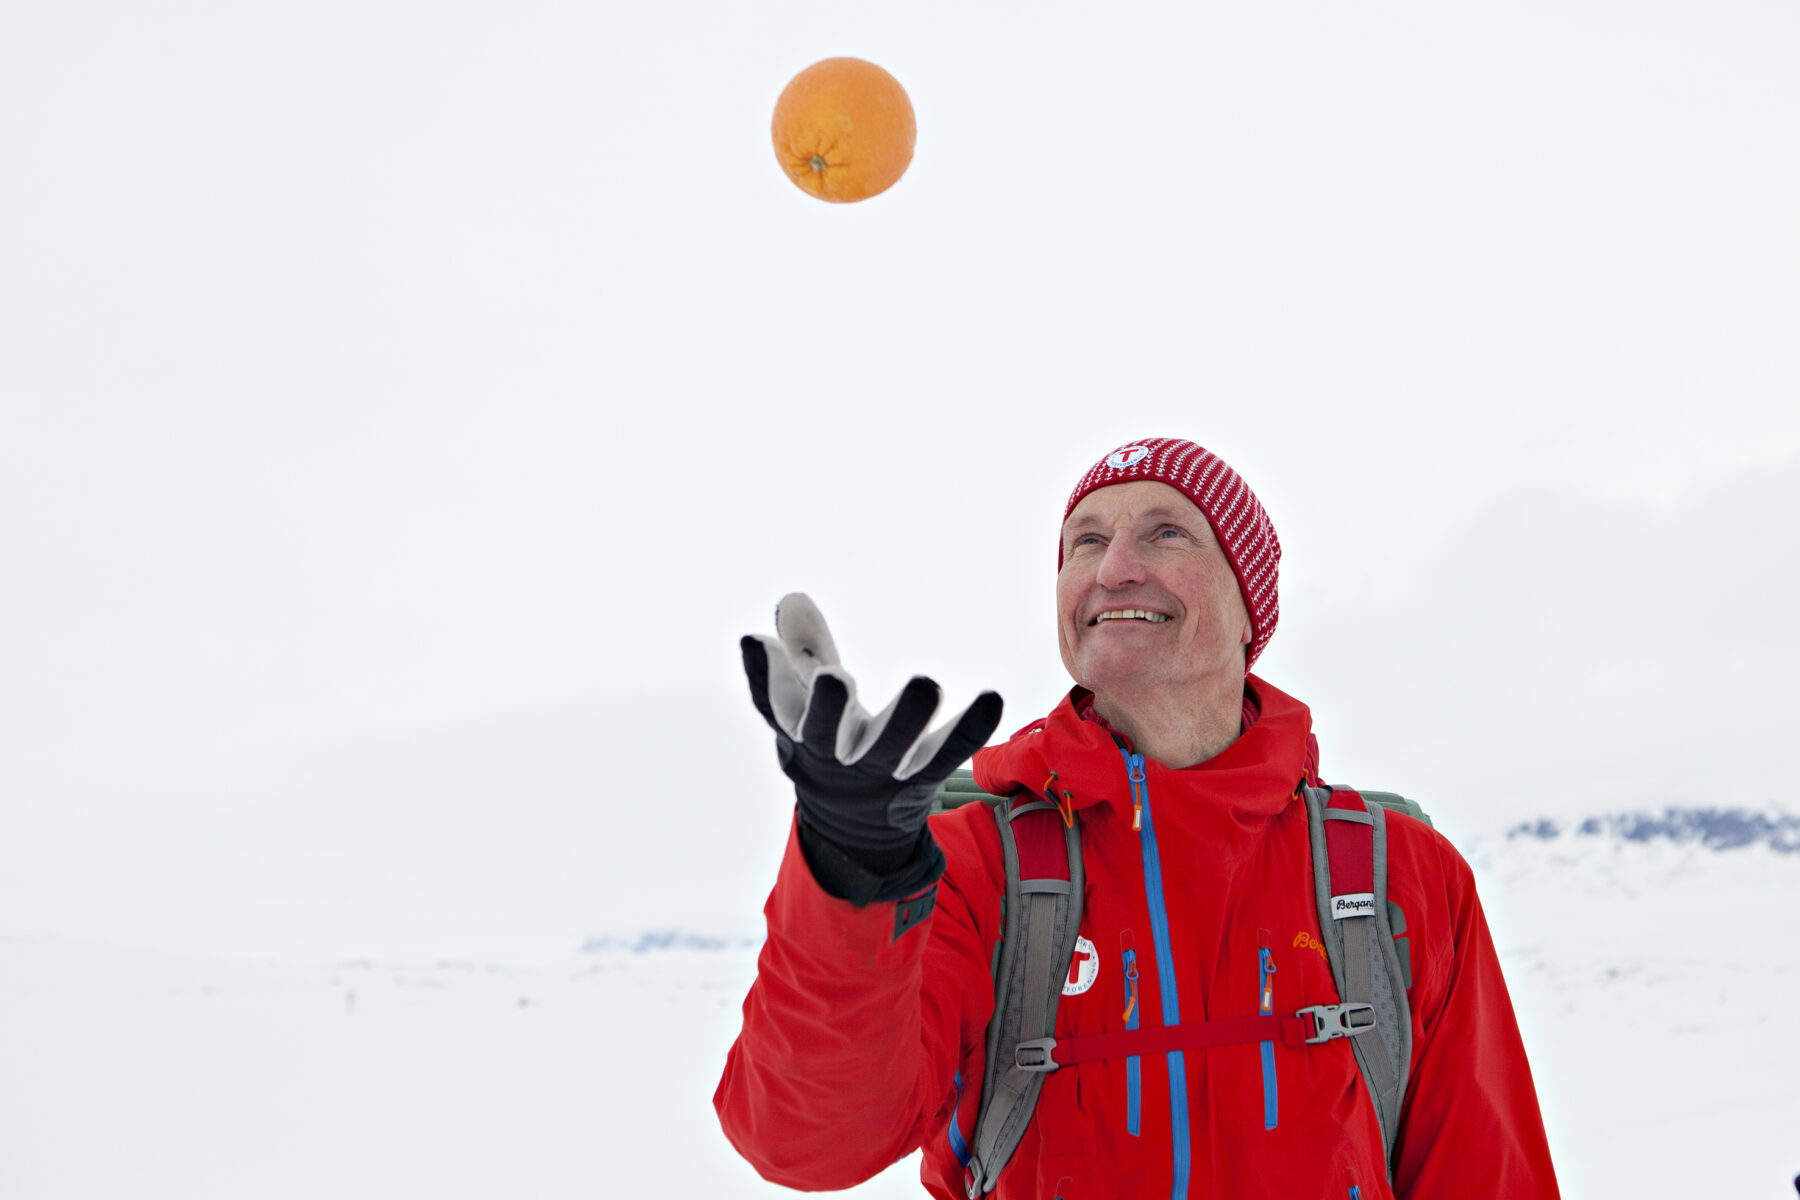 The skiing will not be the same if you forget to bring an orange. Ask any Norwegian, they’ll tell you it’s true. Photo: Elin Hansson